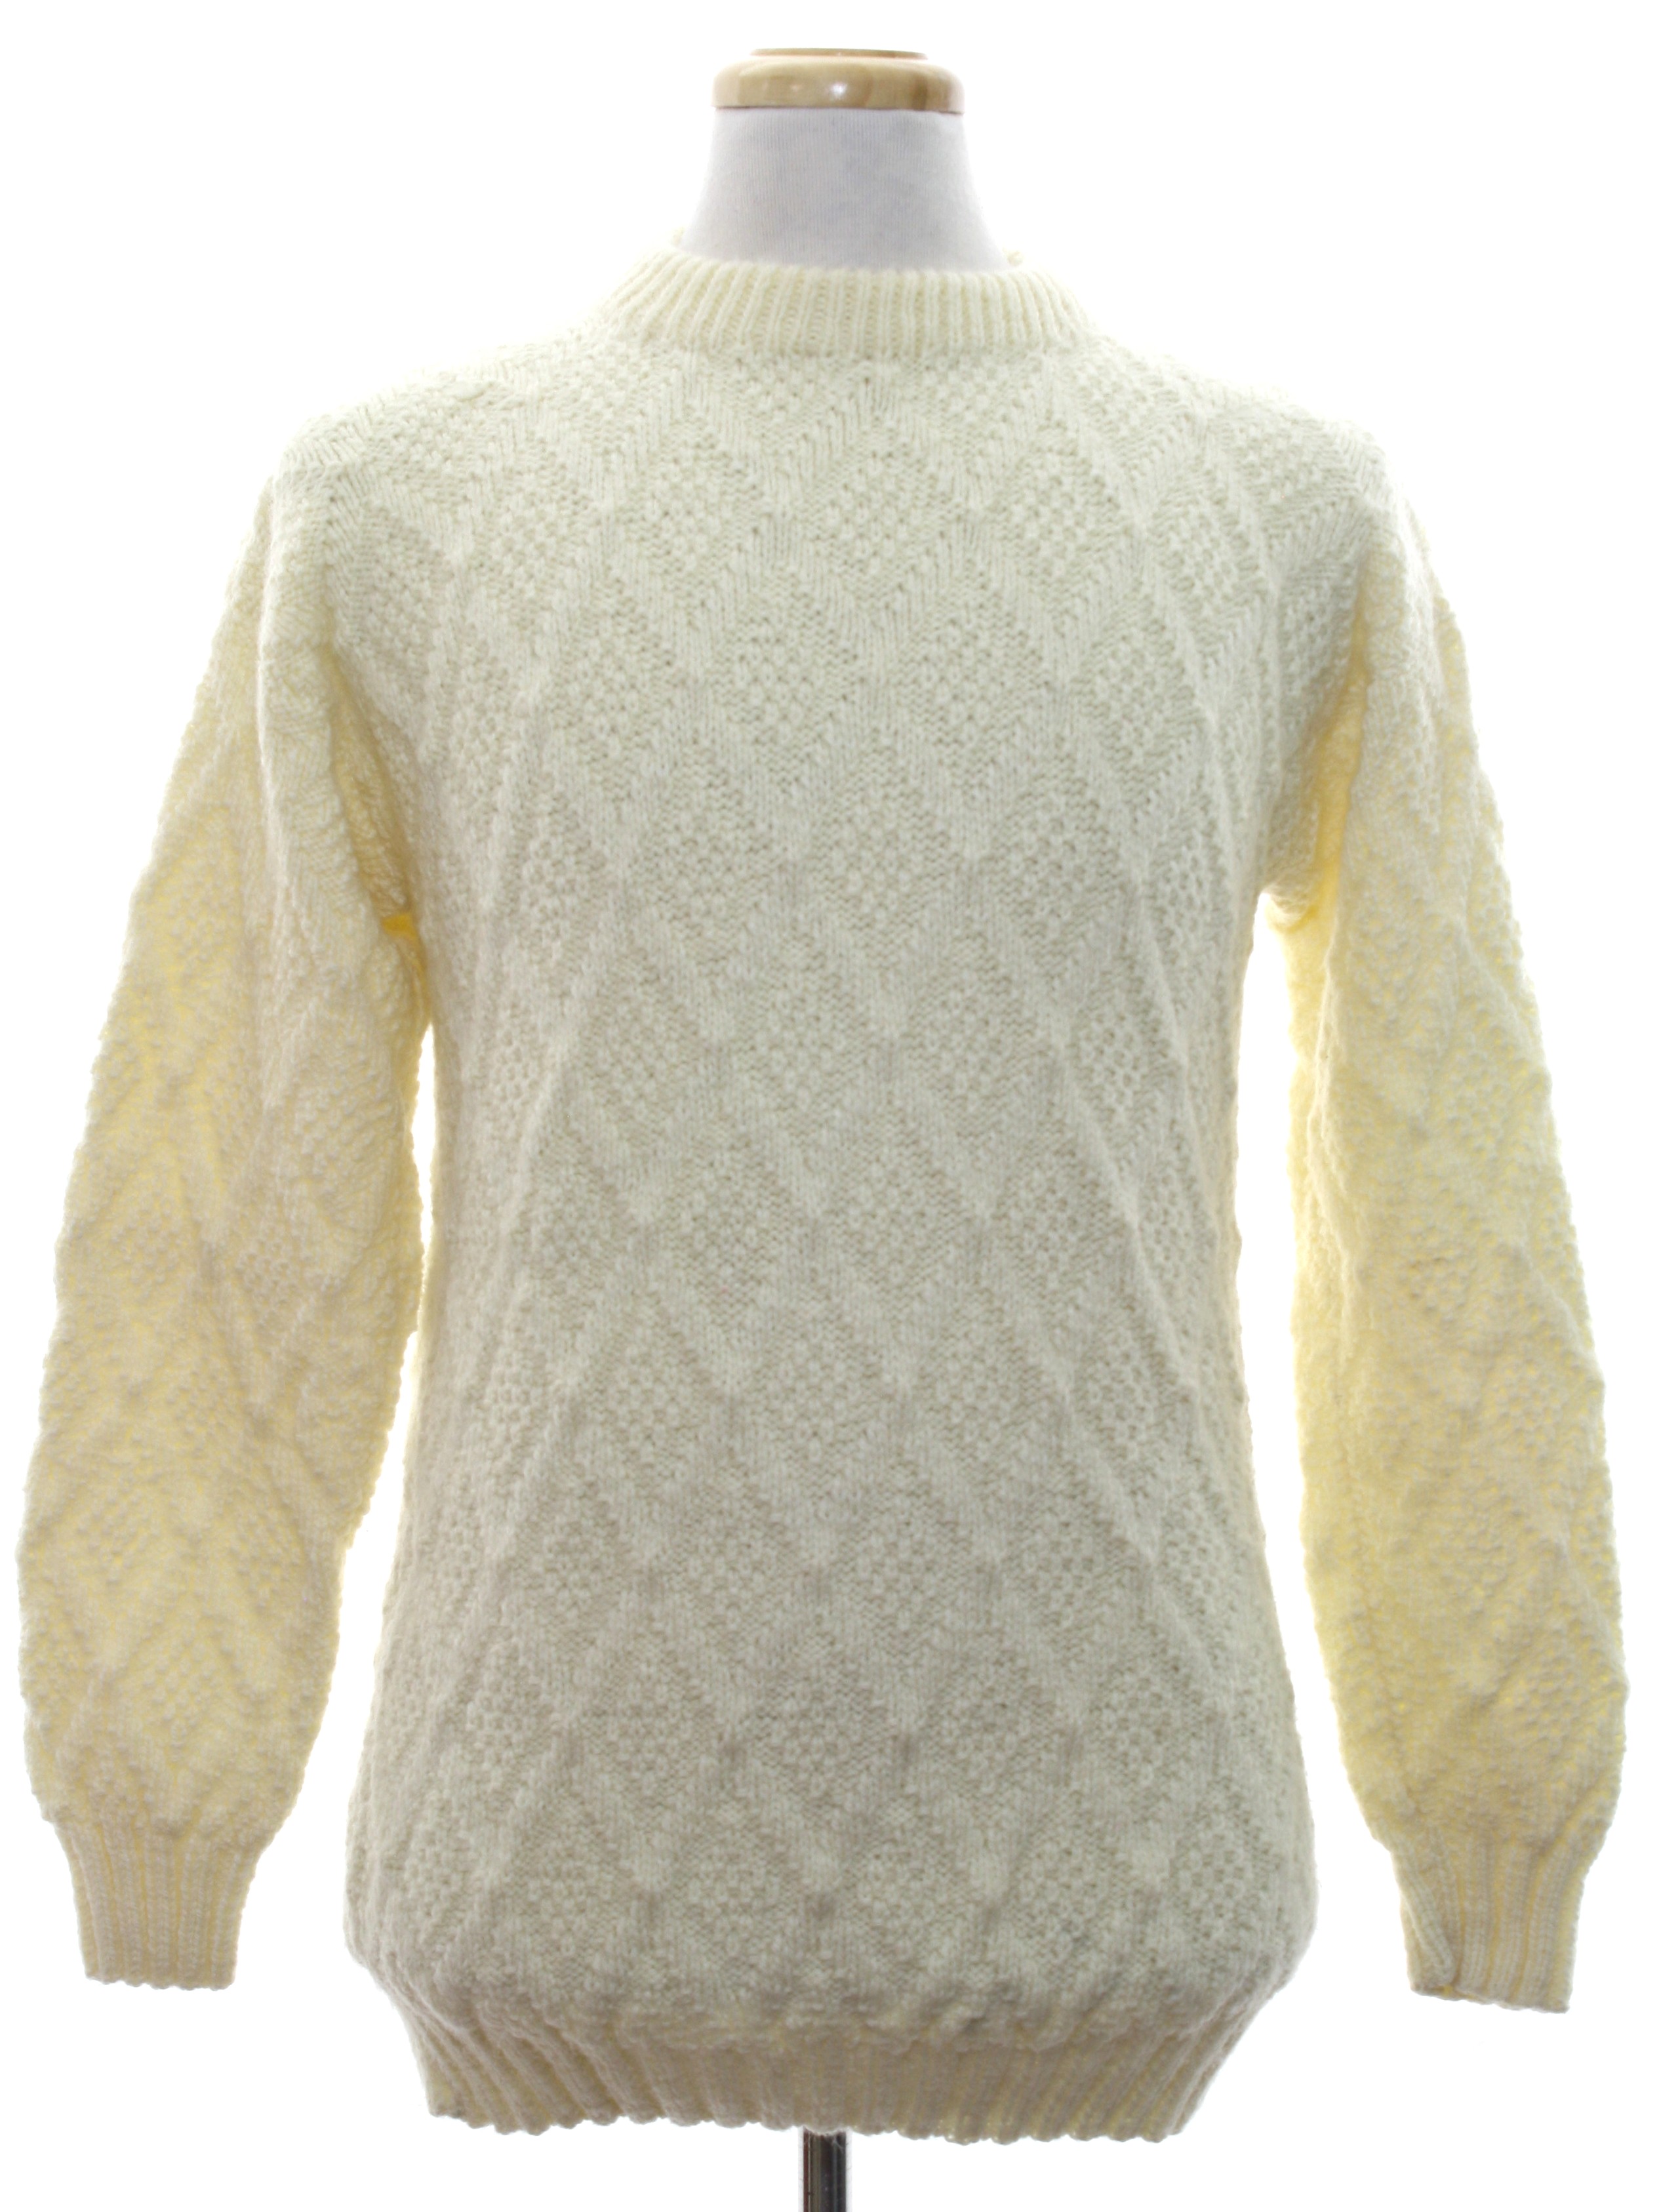 Vintage 70s Sweater: Late 70s or Early 80s -Home Sewn- Mens winter ...